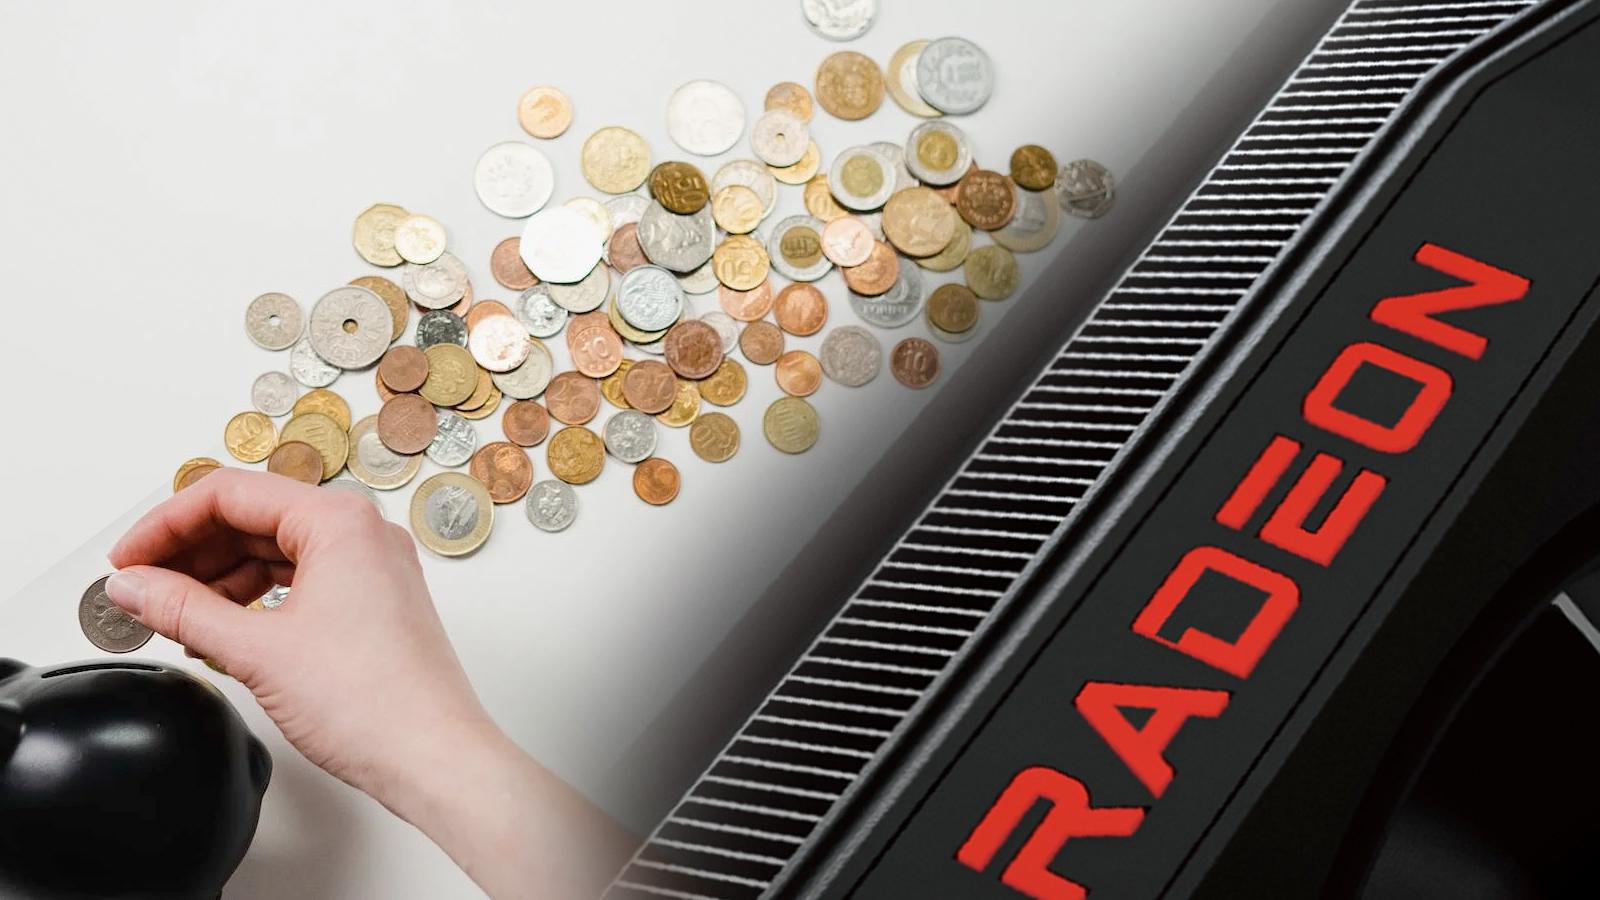 Radeon card with pennies